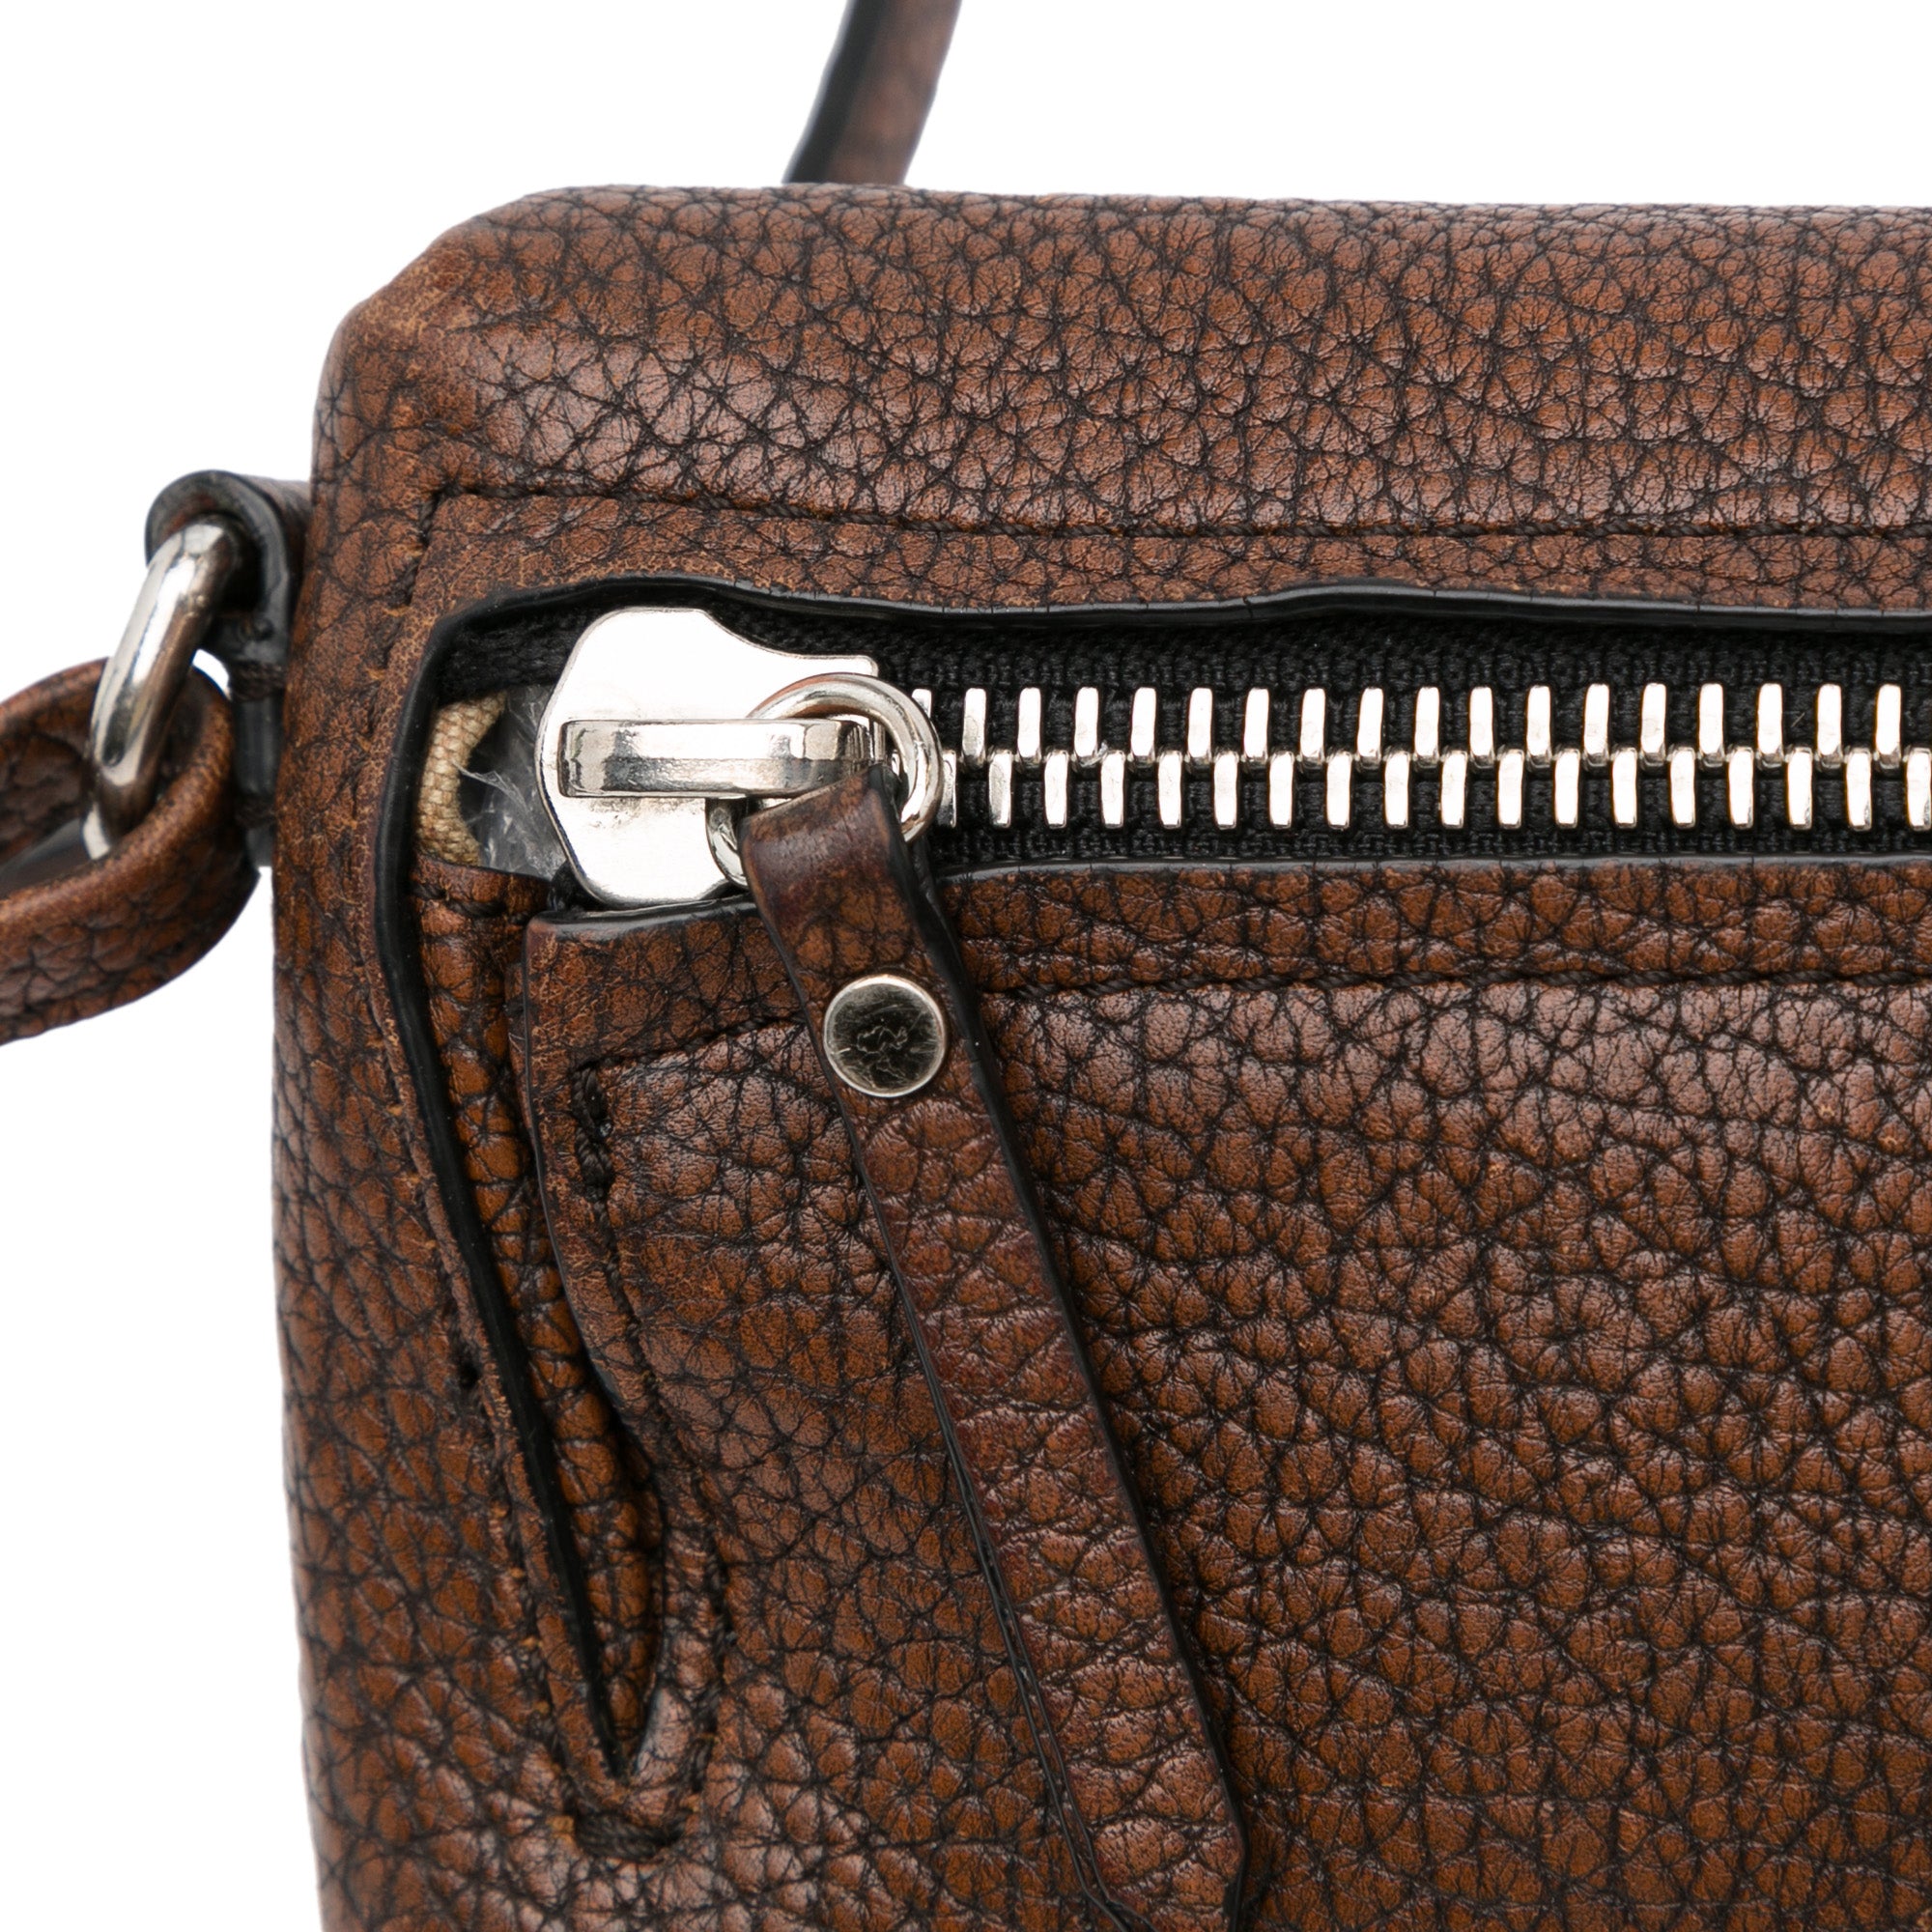 Brown Burberry Leather Crossbody Bag, RvceShops Revival